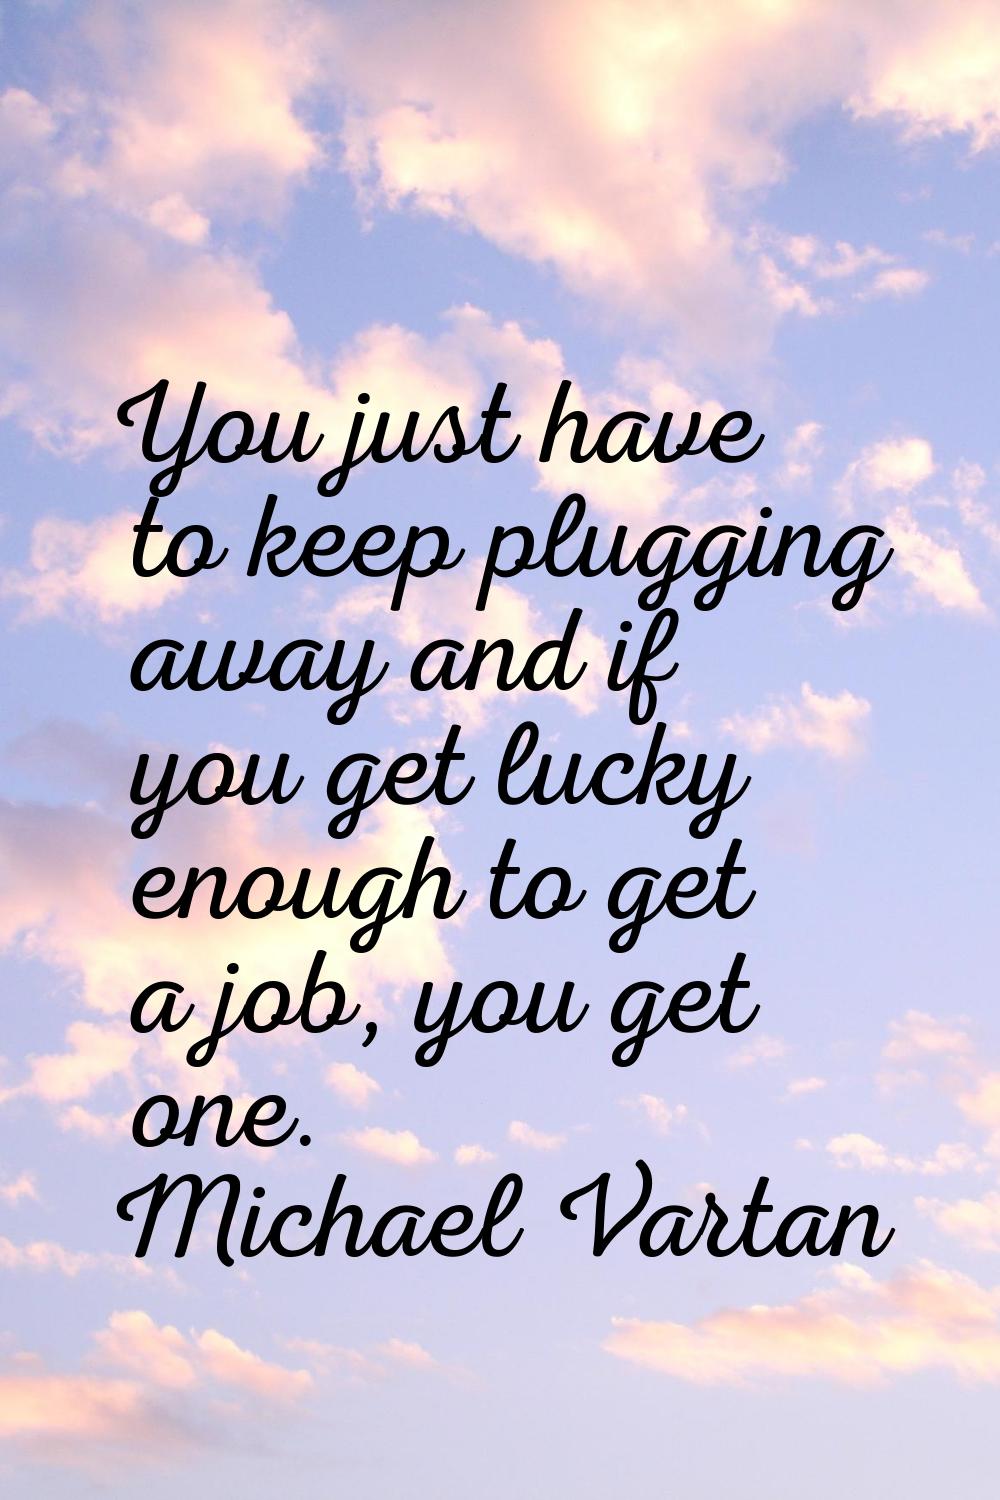 You just have to keep plugging away and if you get lucky enough to get a job, you get one.